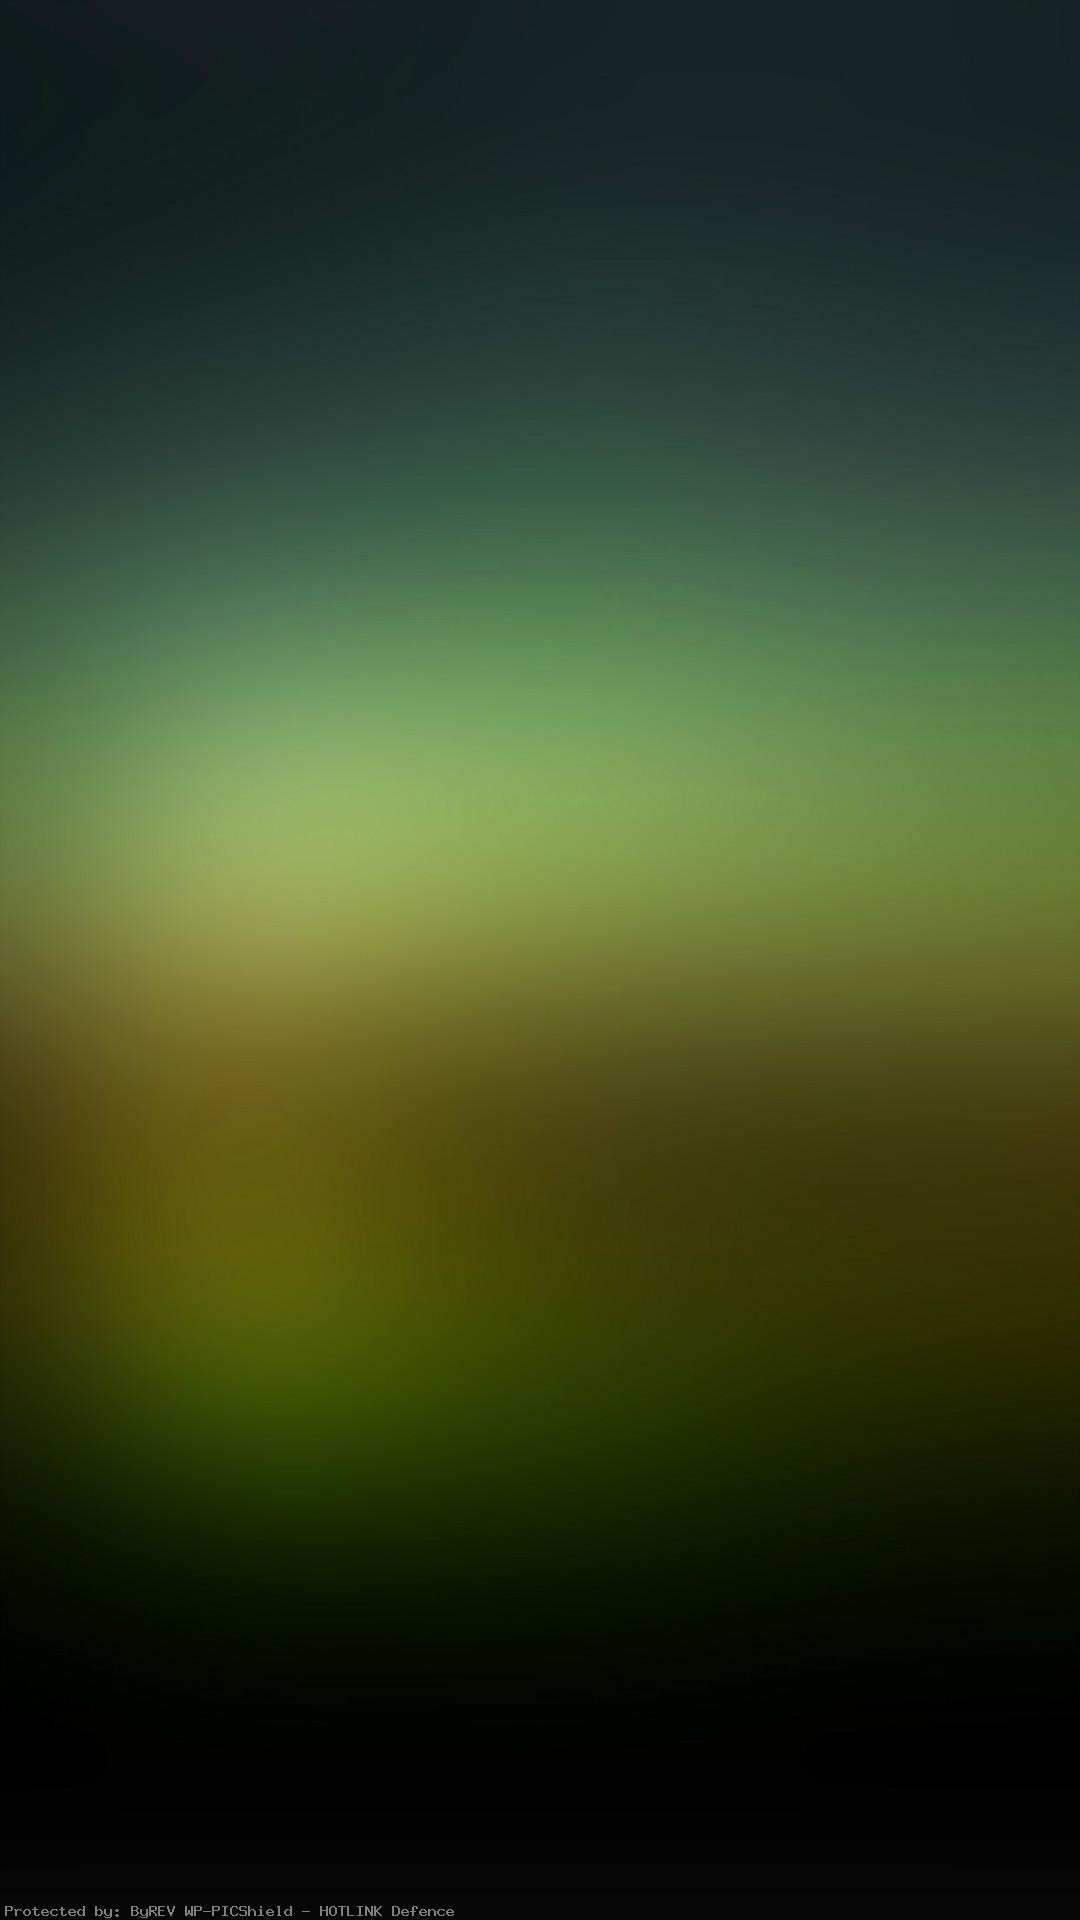 Aurora Night Nature Gradation Blur Iphone Wallpaper - Solid Color Hd Wallpaper For Android - HD Wallpaper 